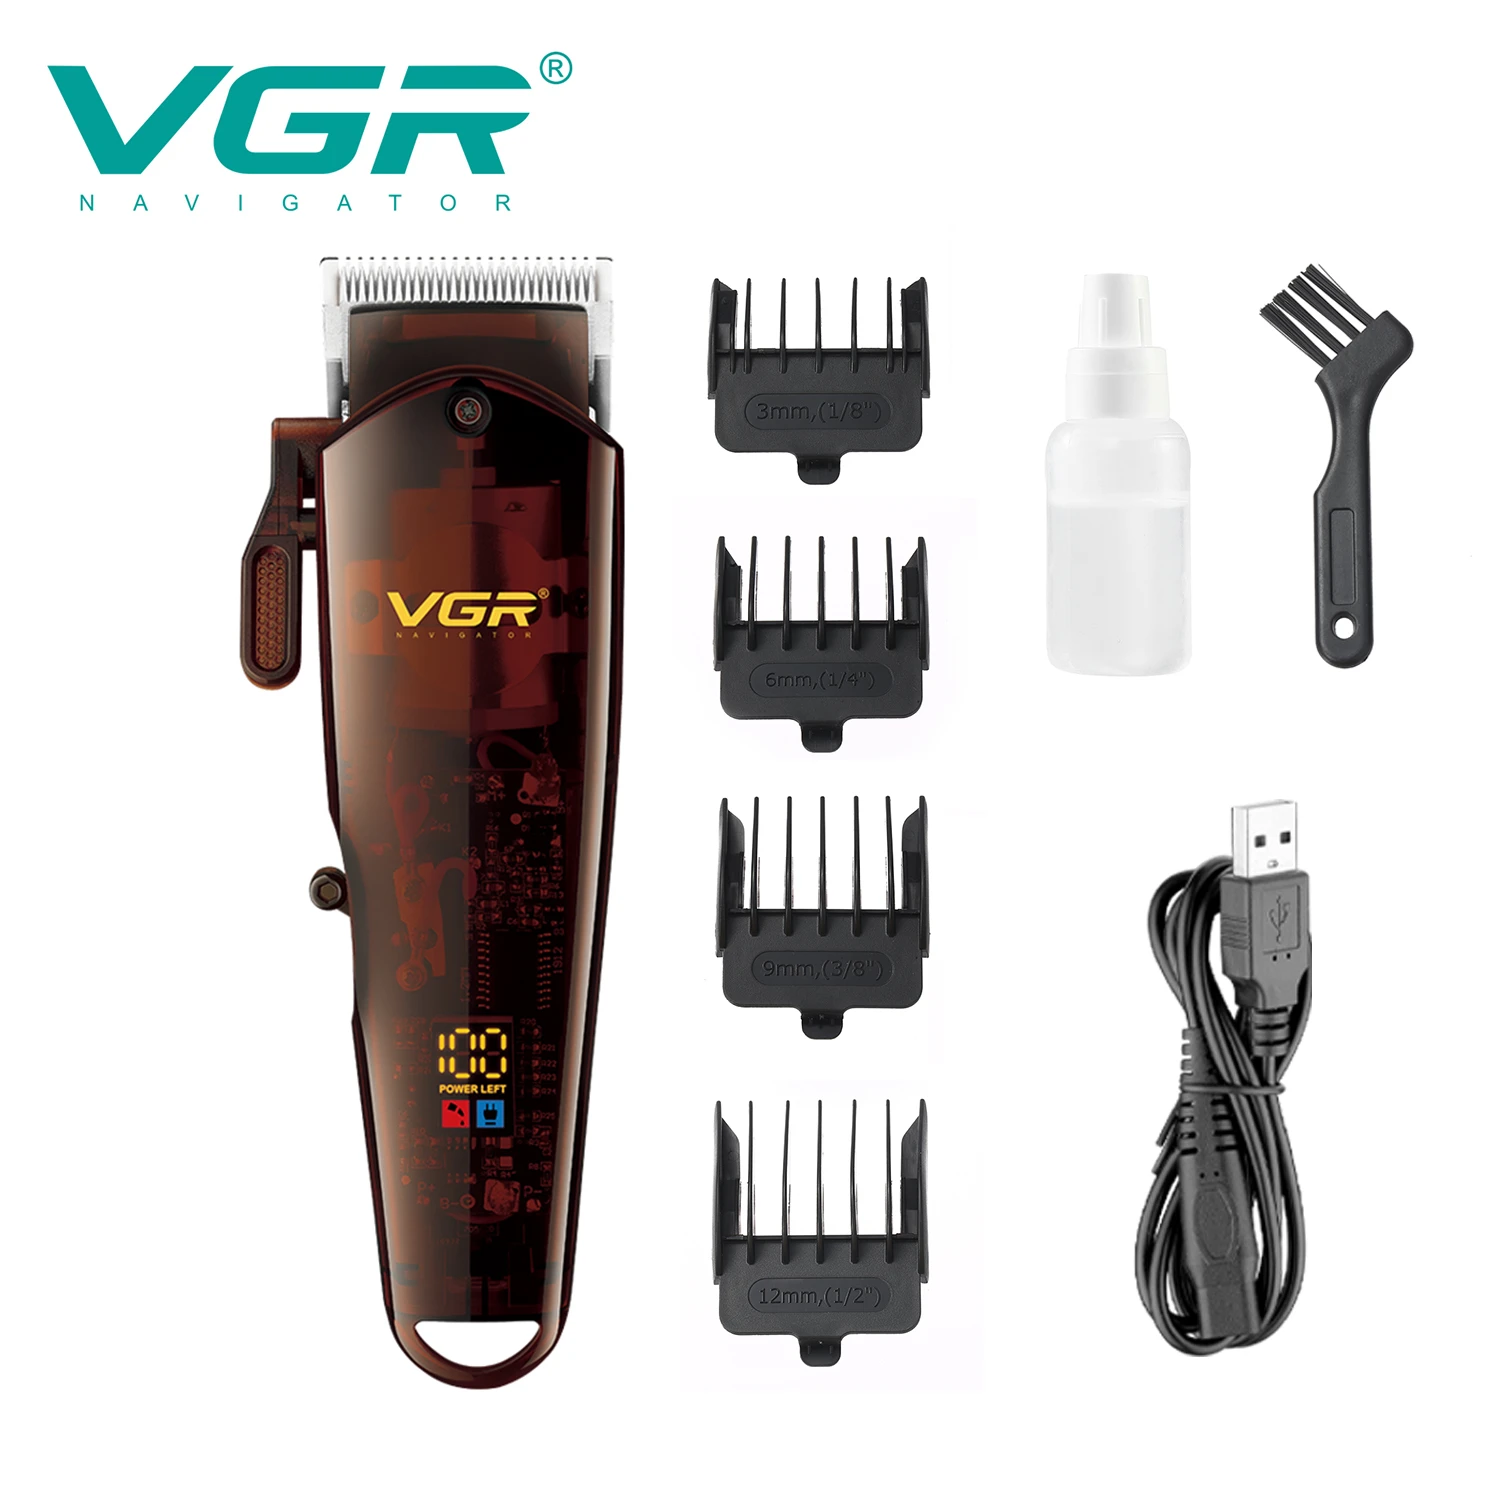 VGR professional cordless hair clippers V-165 rechargeable hair clippers with LED display